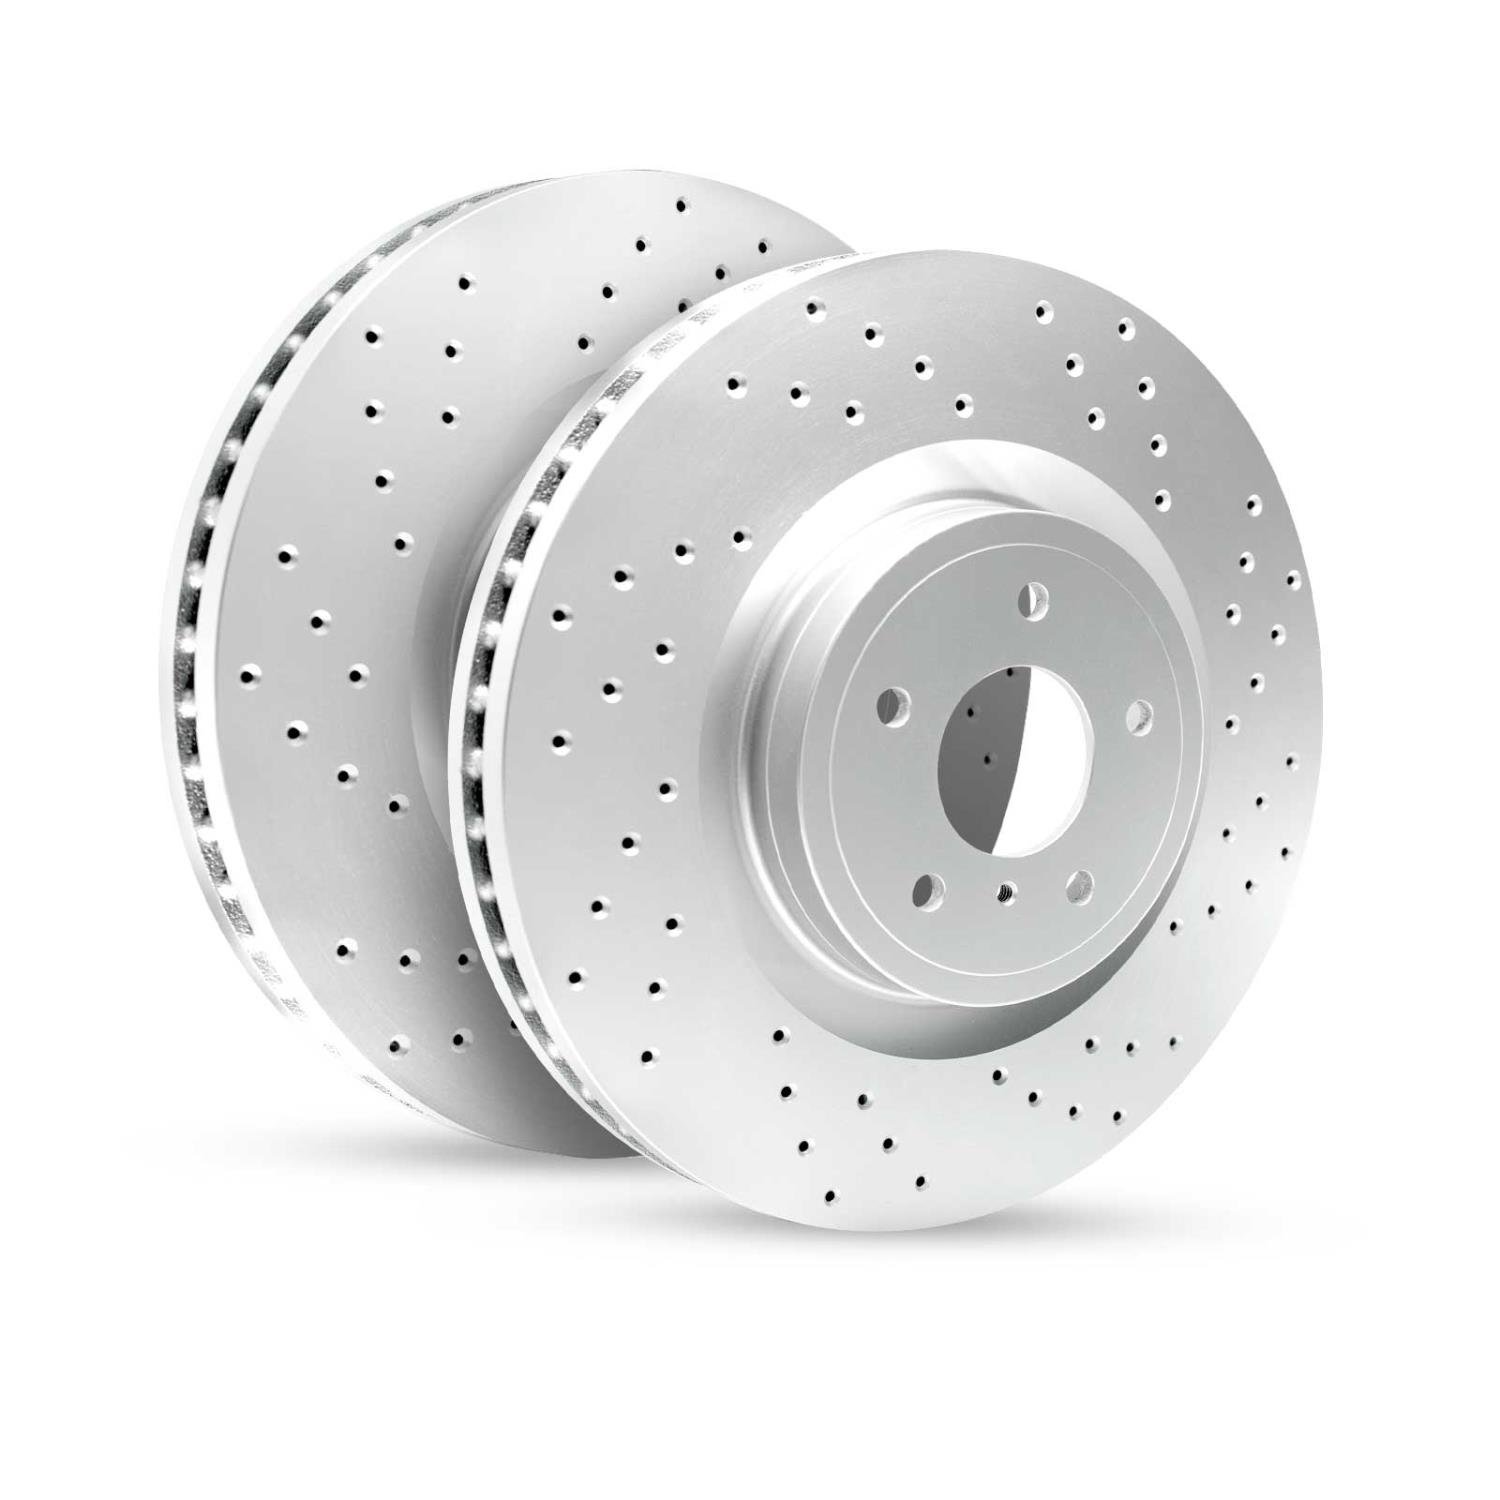 GEO-Carbon Drilled/Slotted Rotors, Fits Select Multiple Makes/Models, Position: Rear